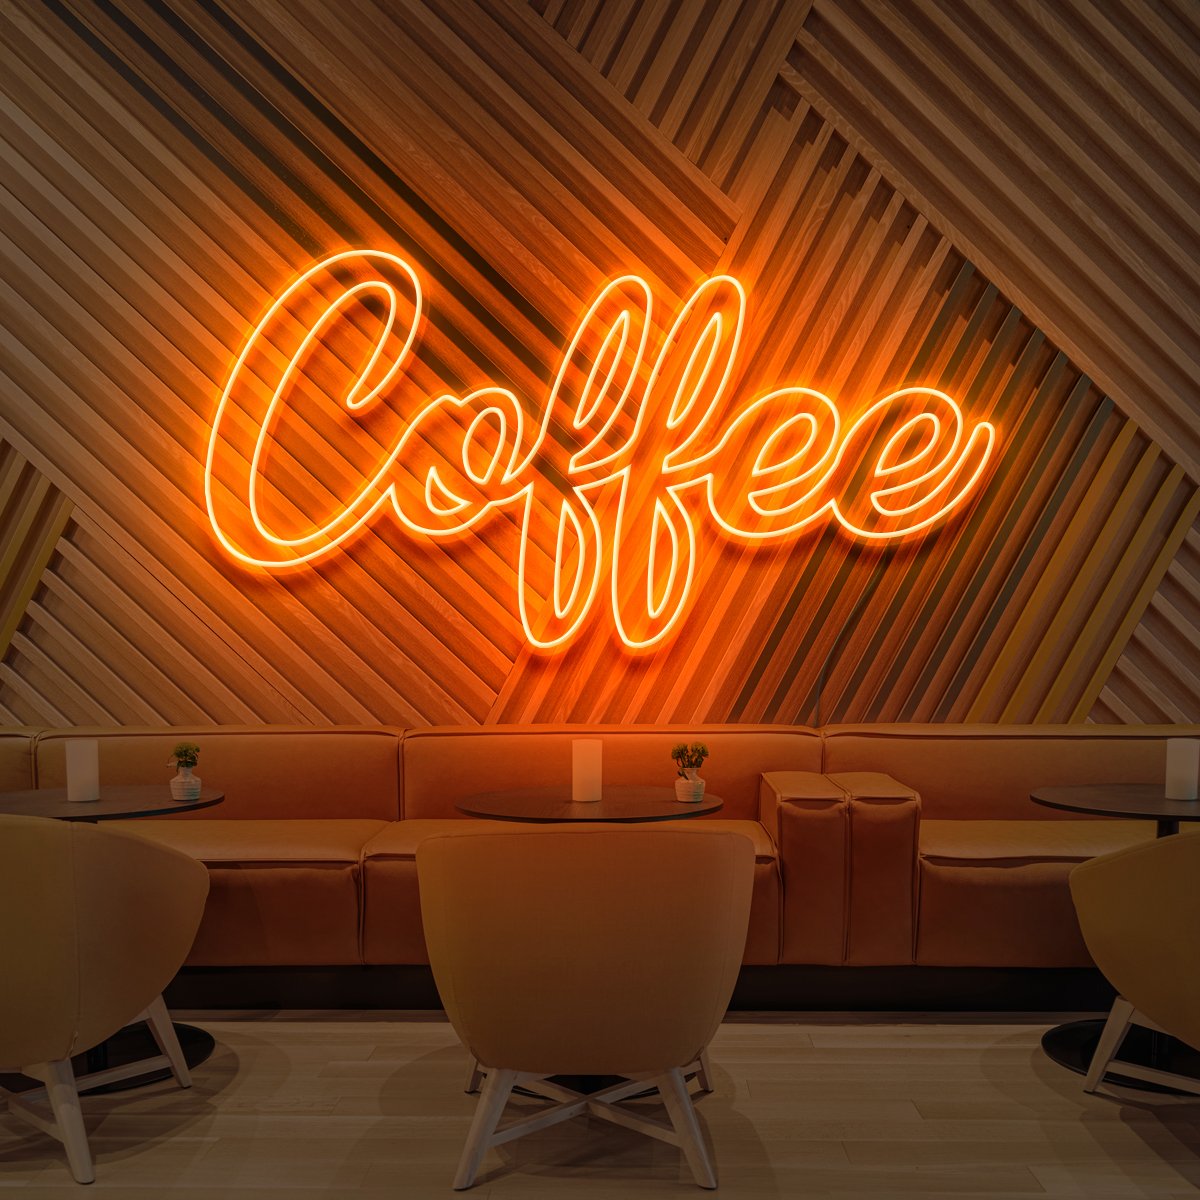 "Coffee" Neon Sign for Cafés